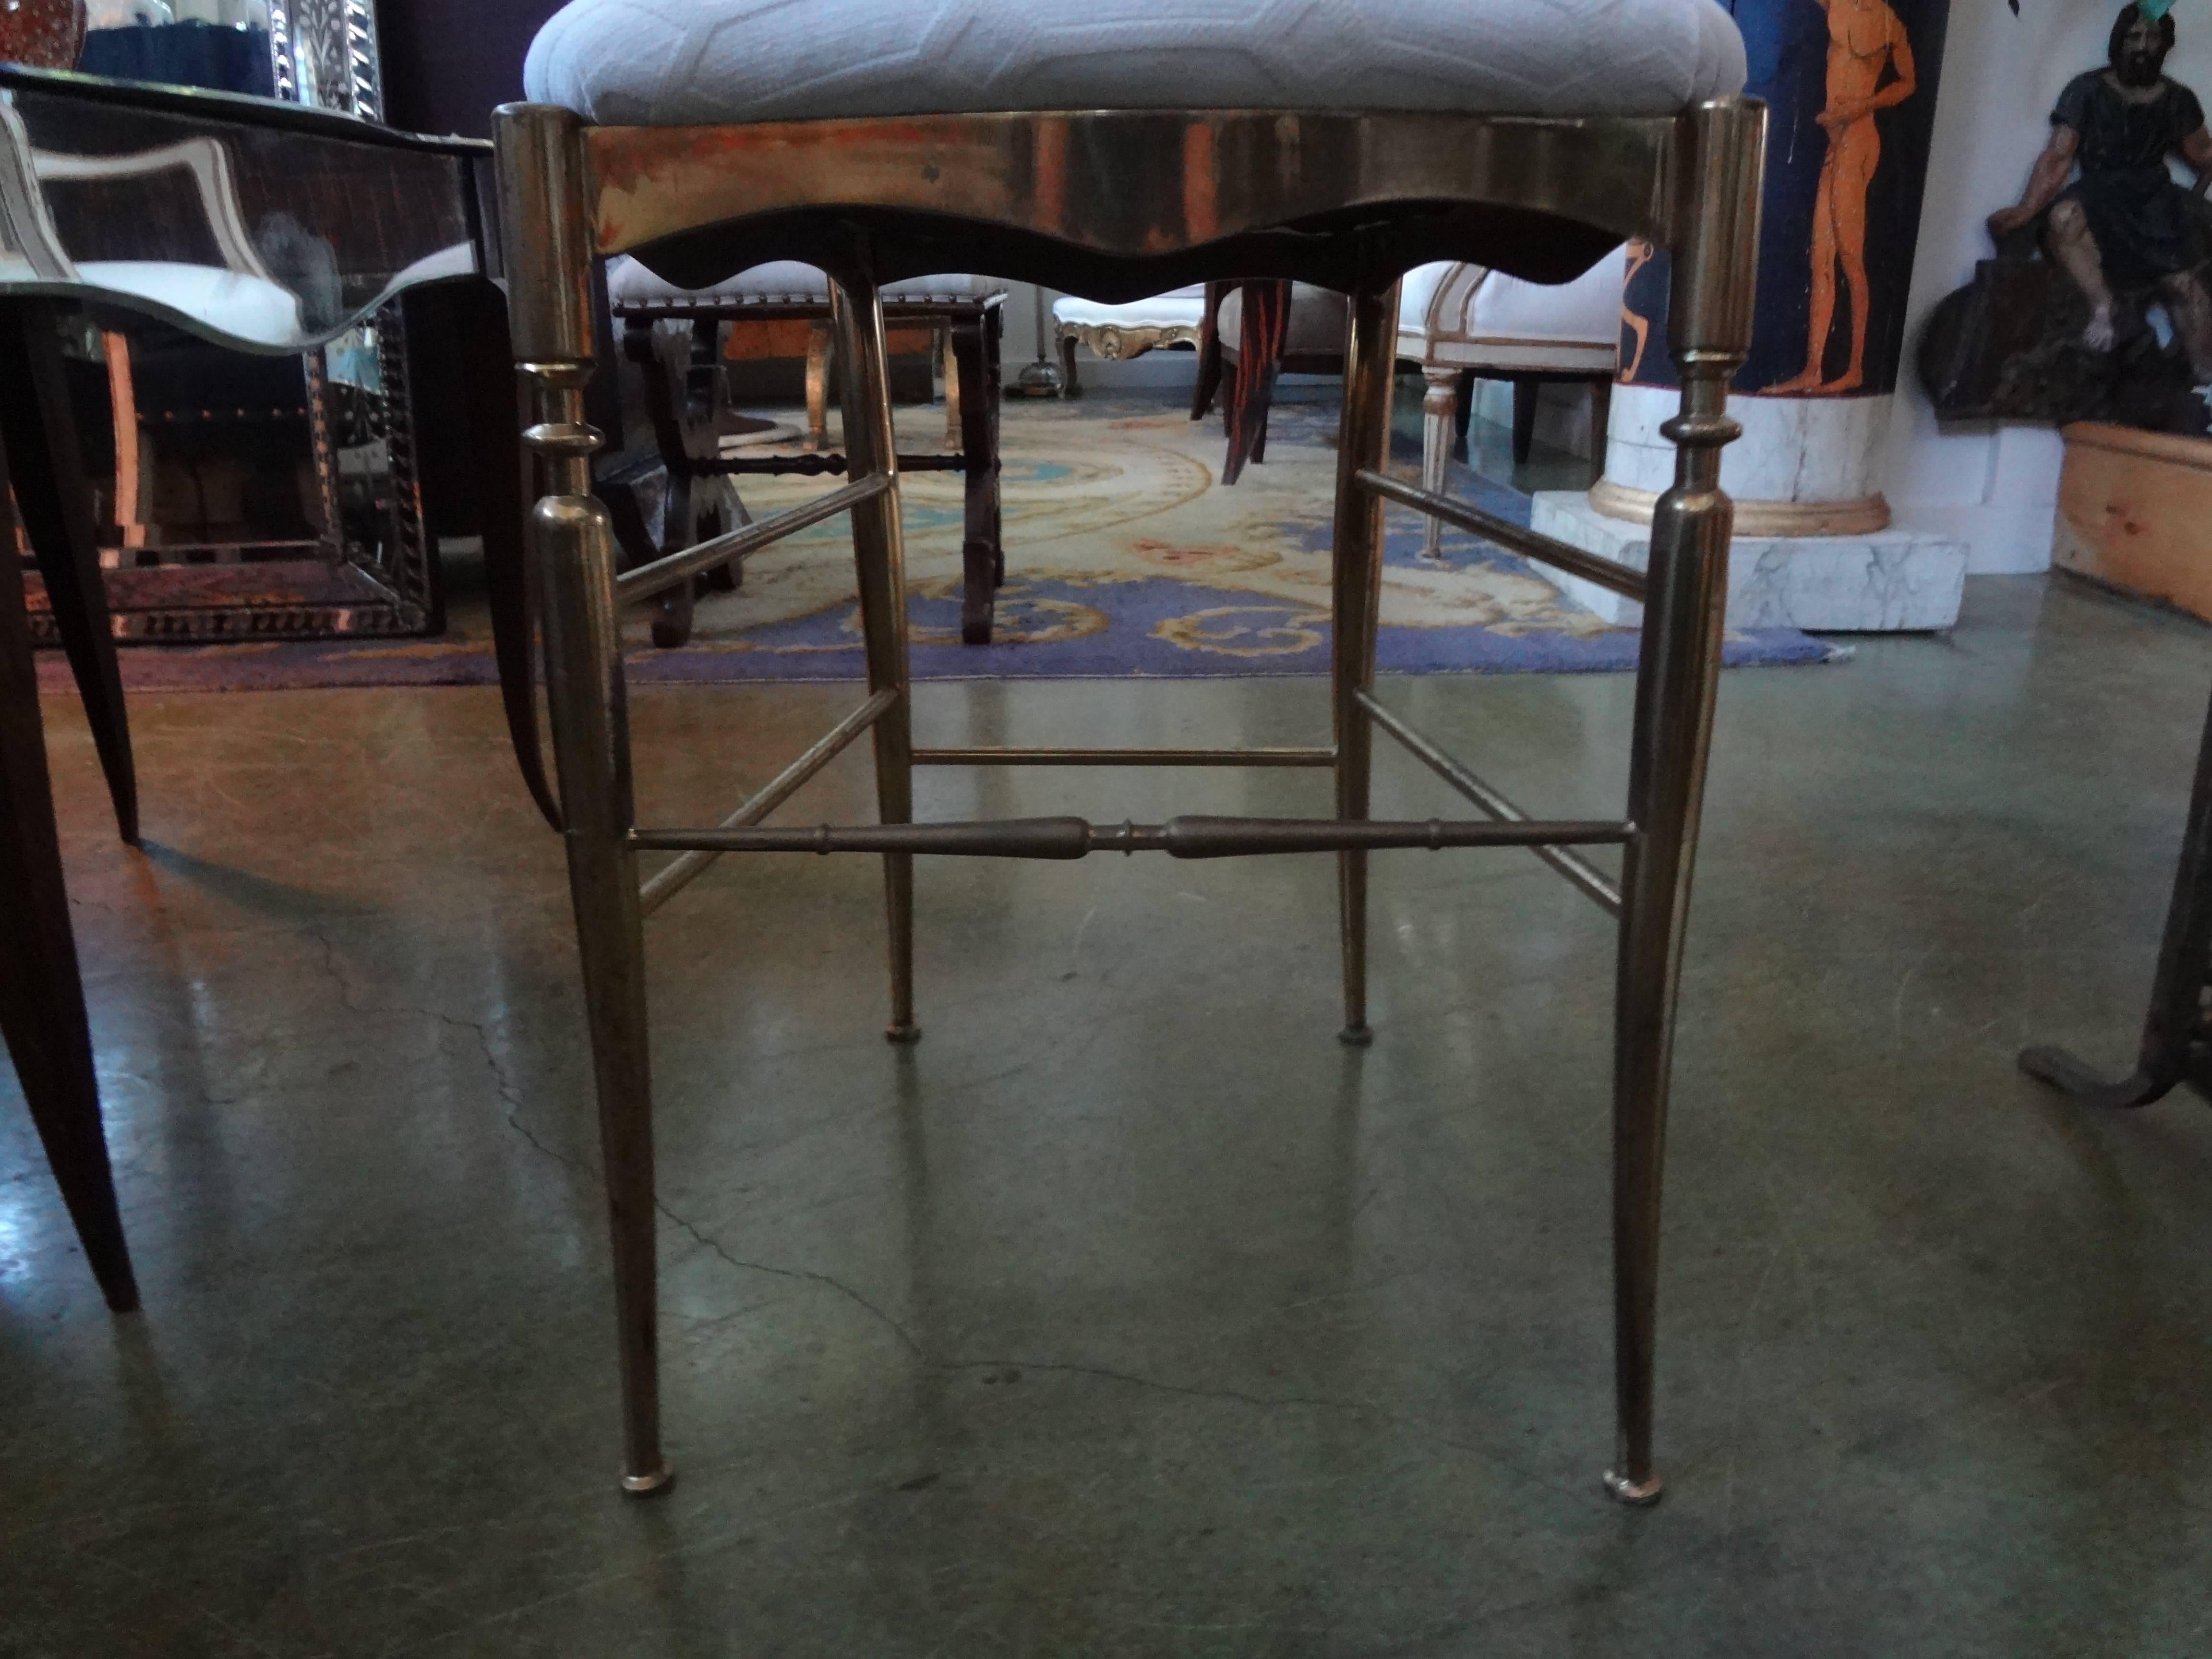 Italian brass Chiavari Campanino chair by Figli Di Sanguineti, circa 1960. This Italian neoclassical style brass chair offers clean lines and comfort. Would be perfect as a side chair in an entrance hall, powder room, vanity or dressing area. This